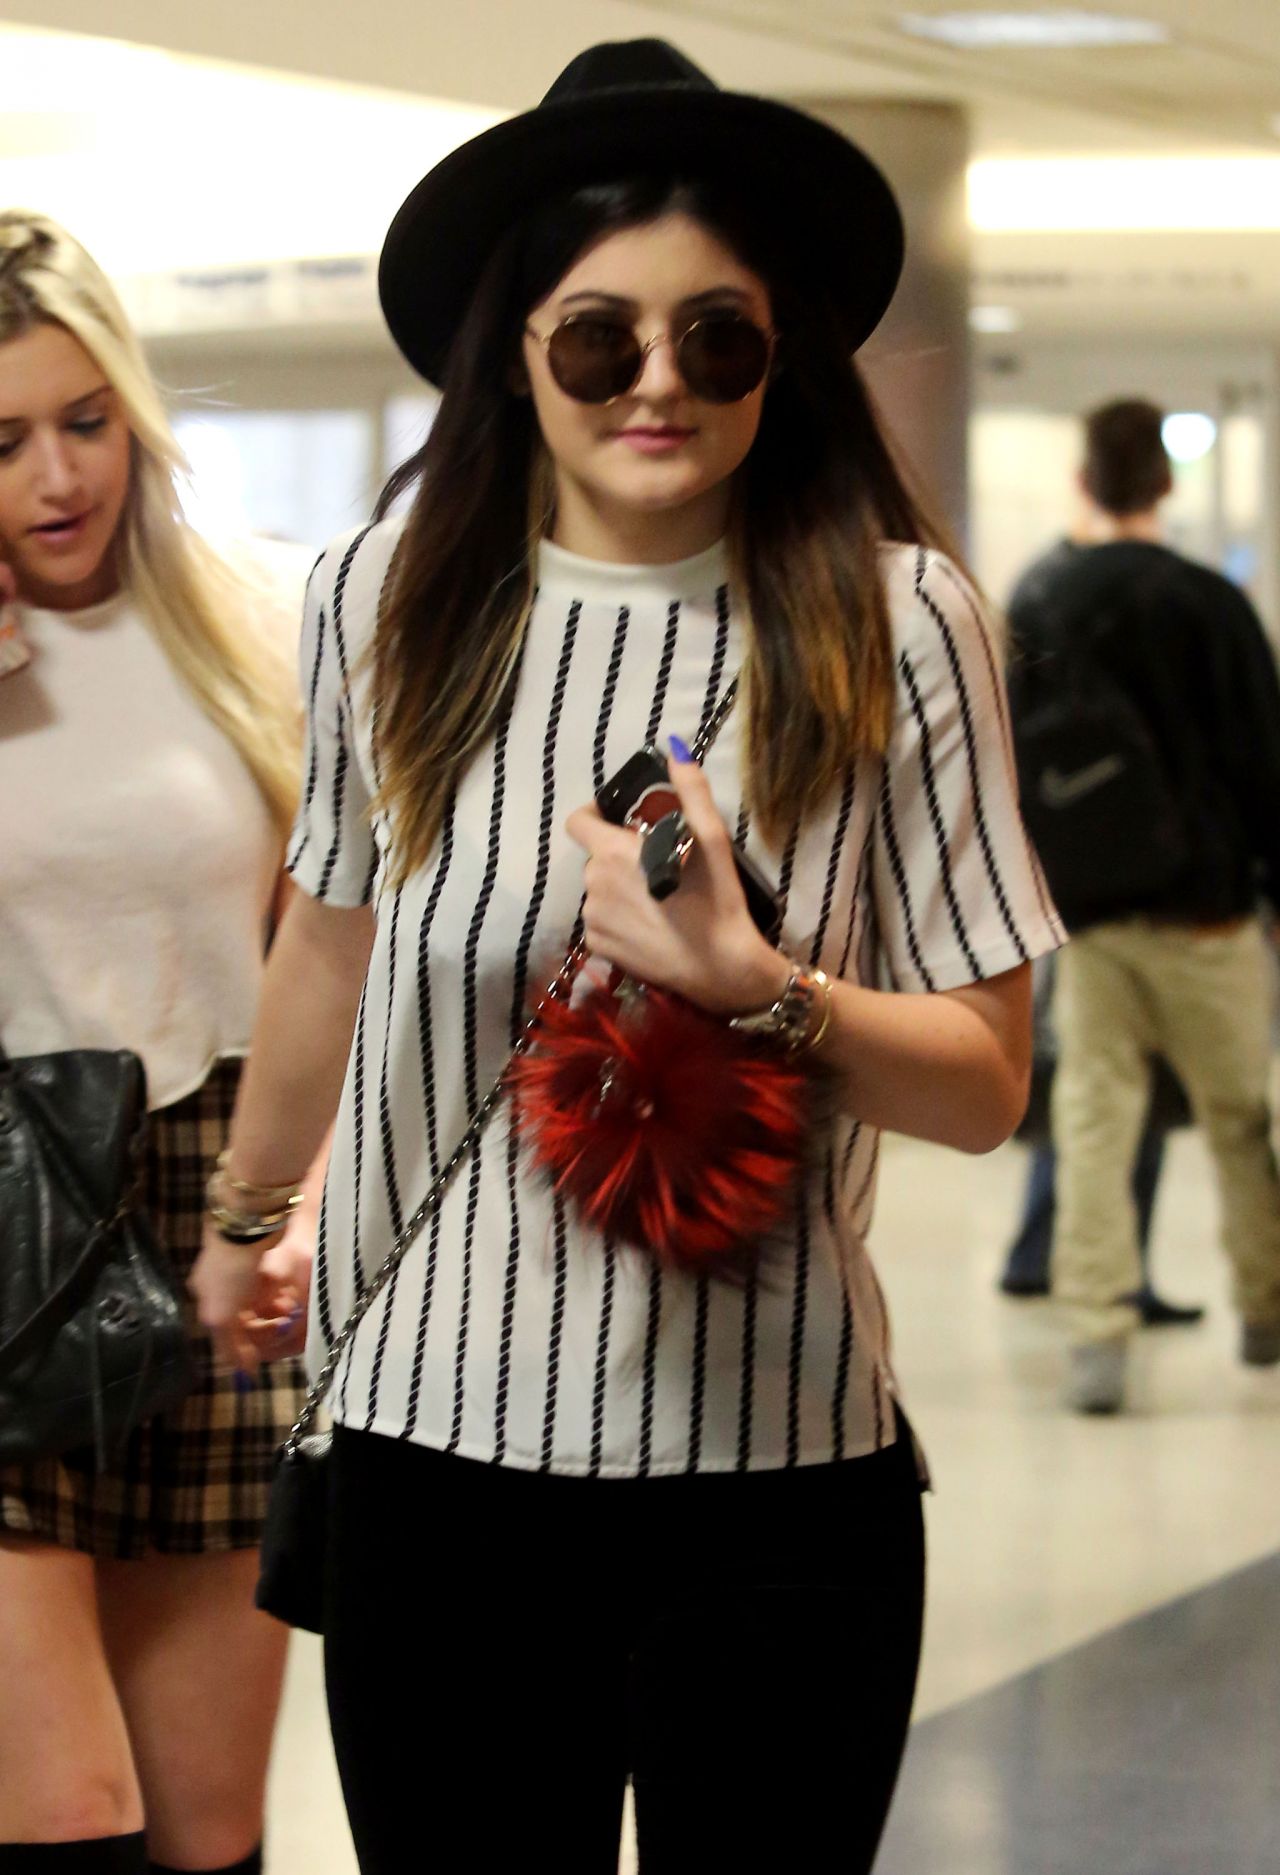 Kylie Jenner LAX Airport August 27, 2014 – Star Style